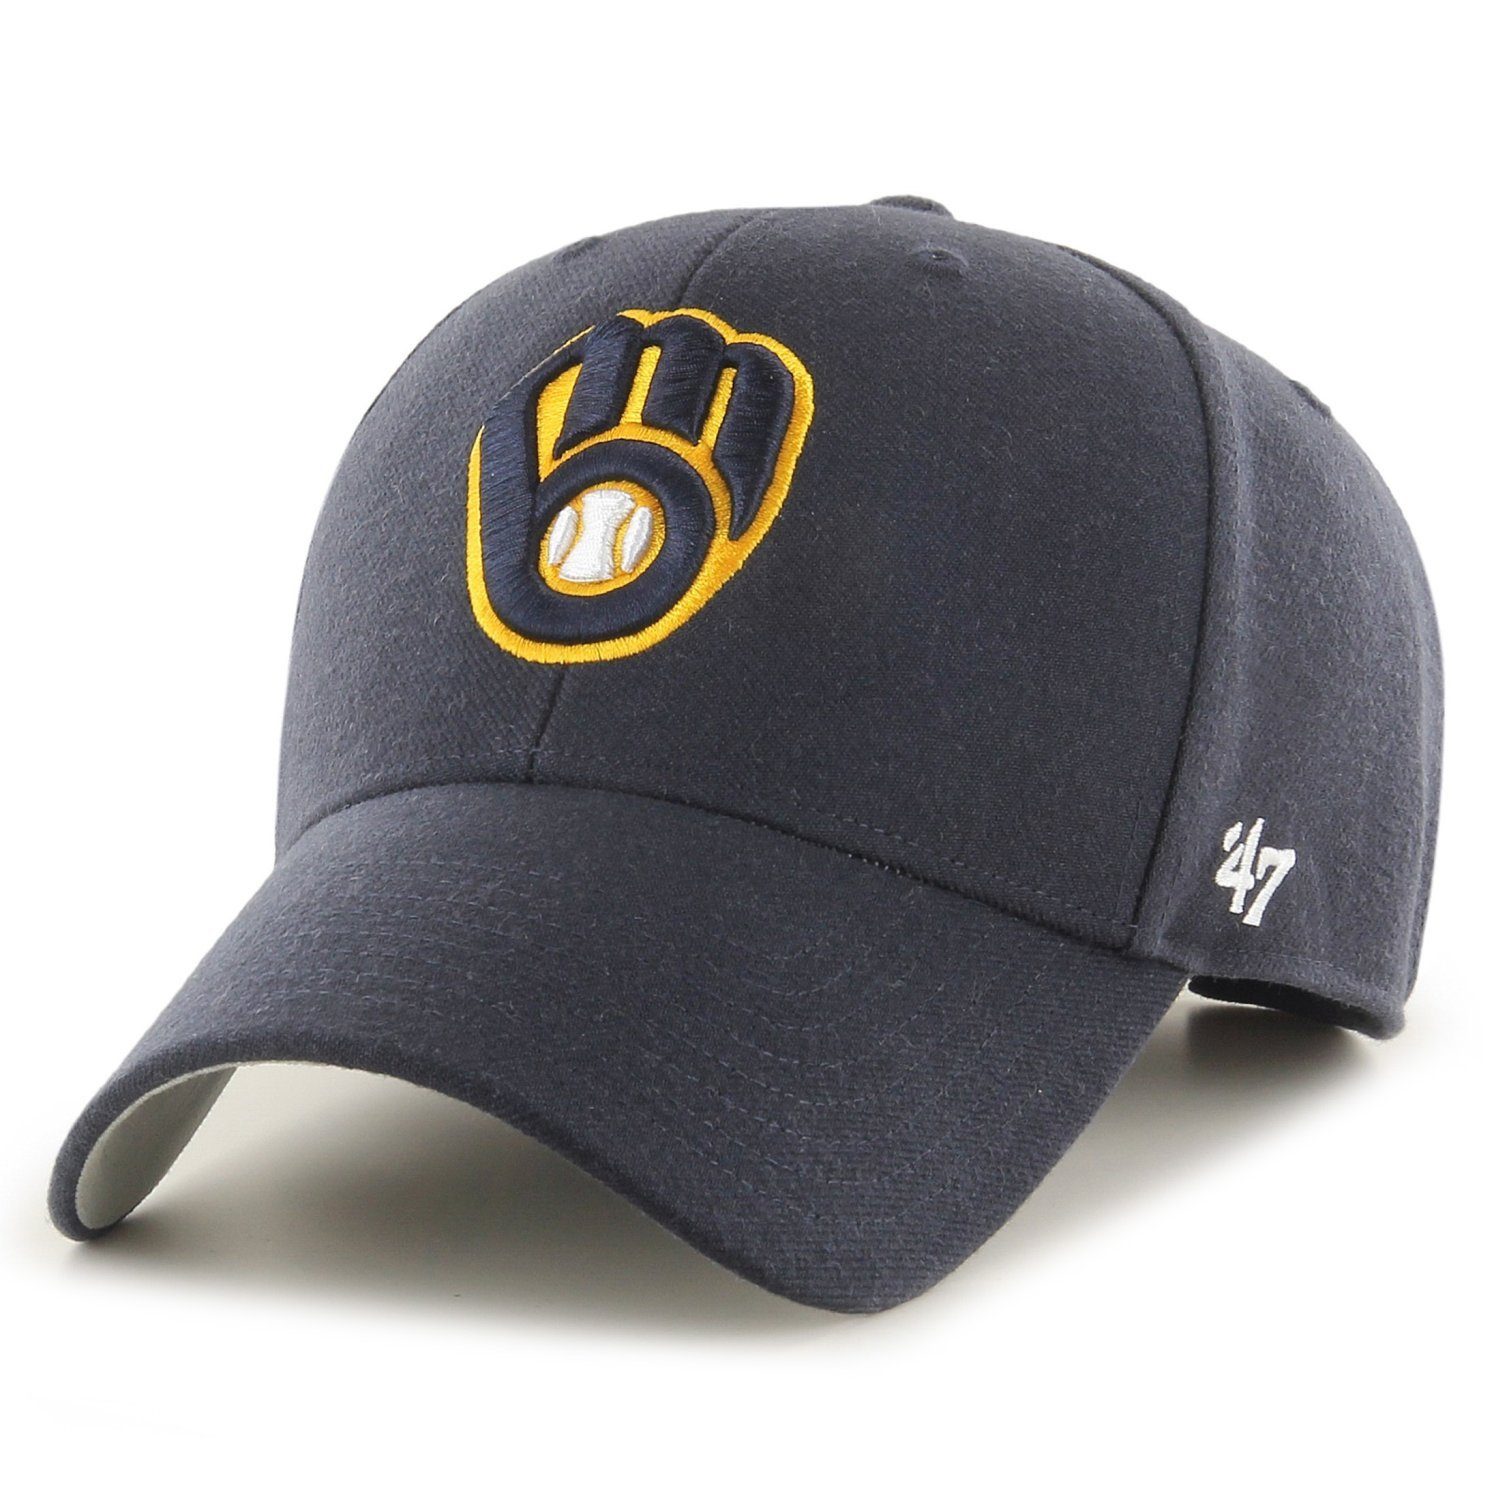 '47 Brand Trucker Cap Relaxed Fit MLB Milwaukee Brewers